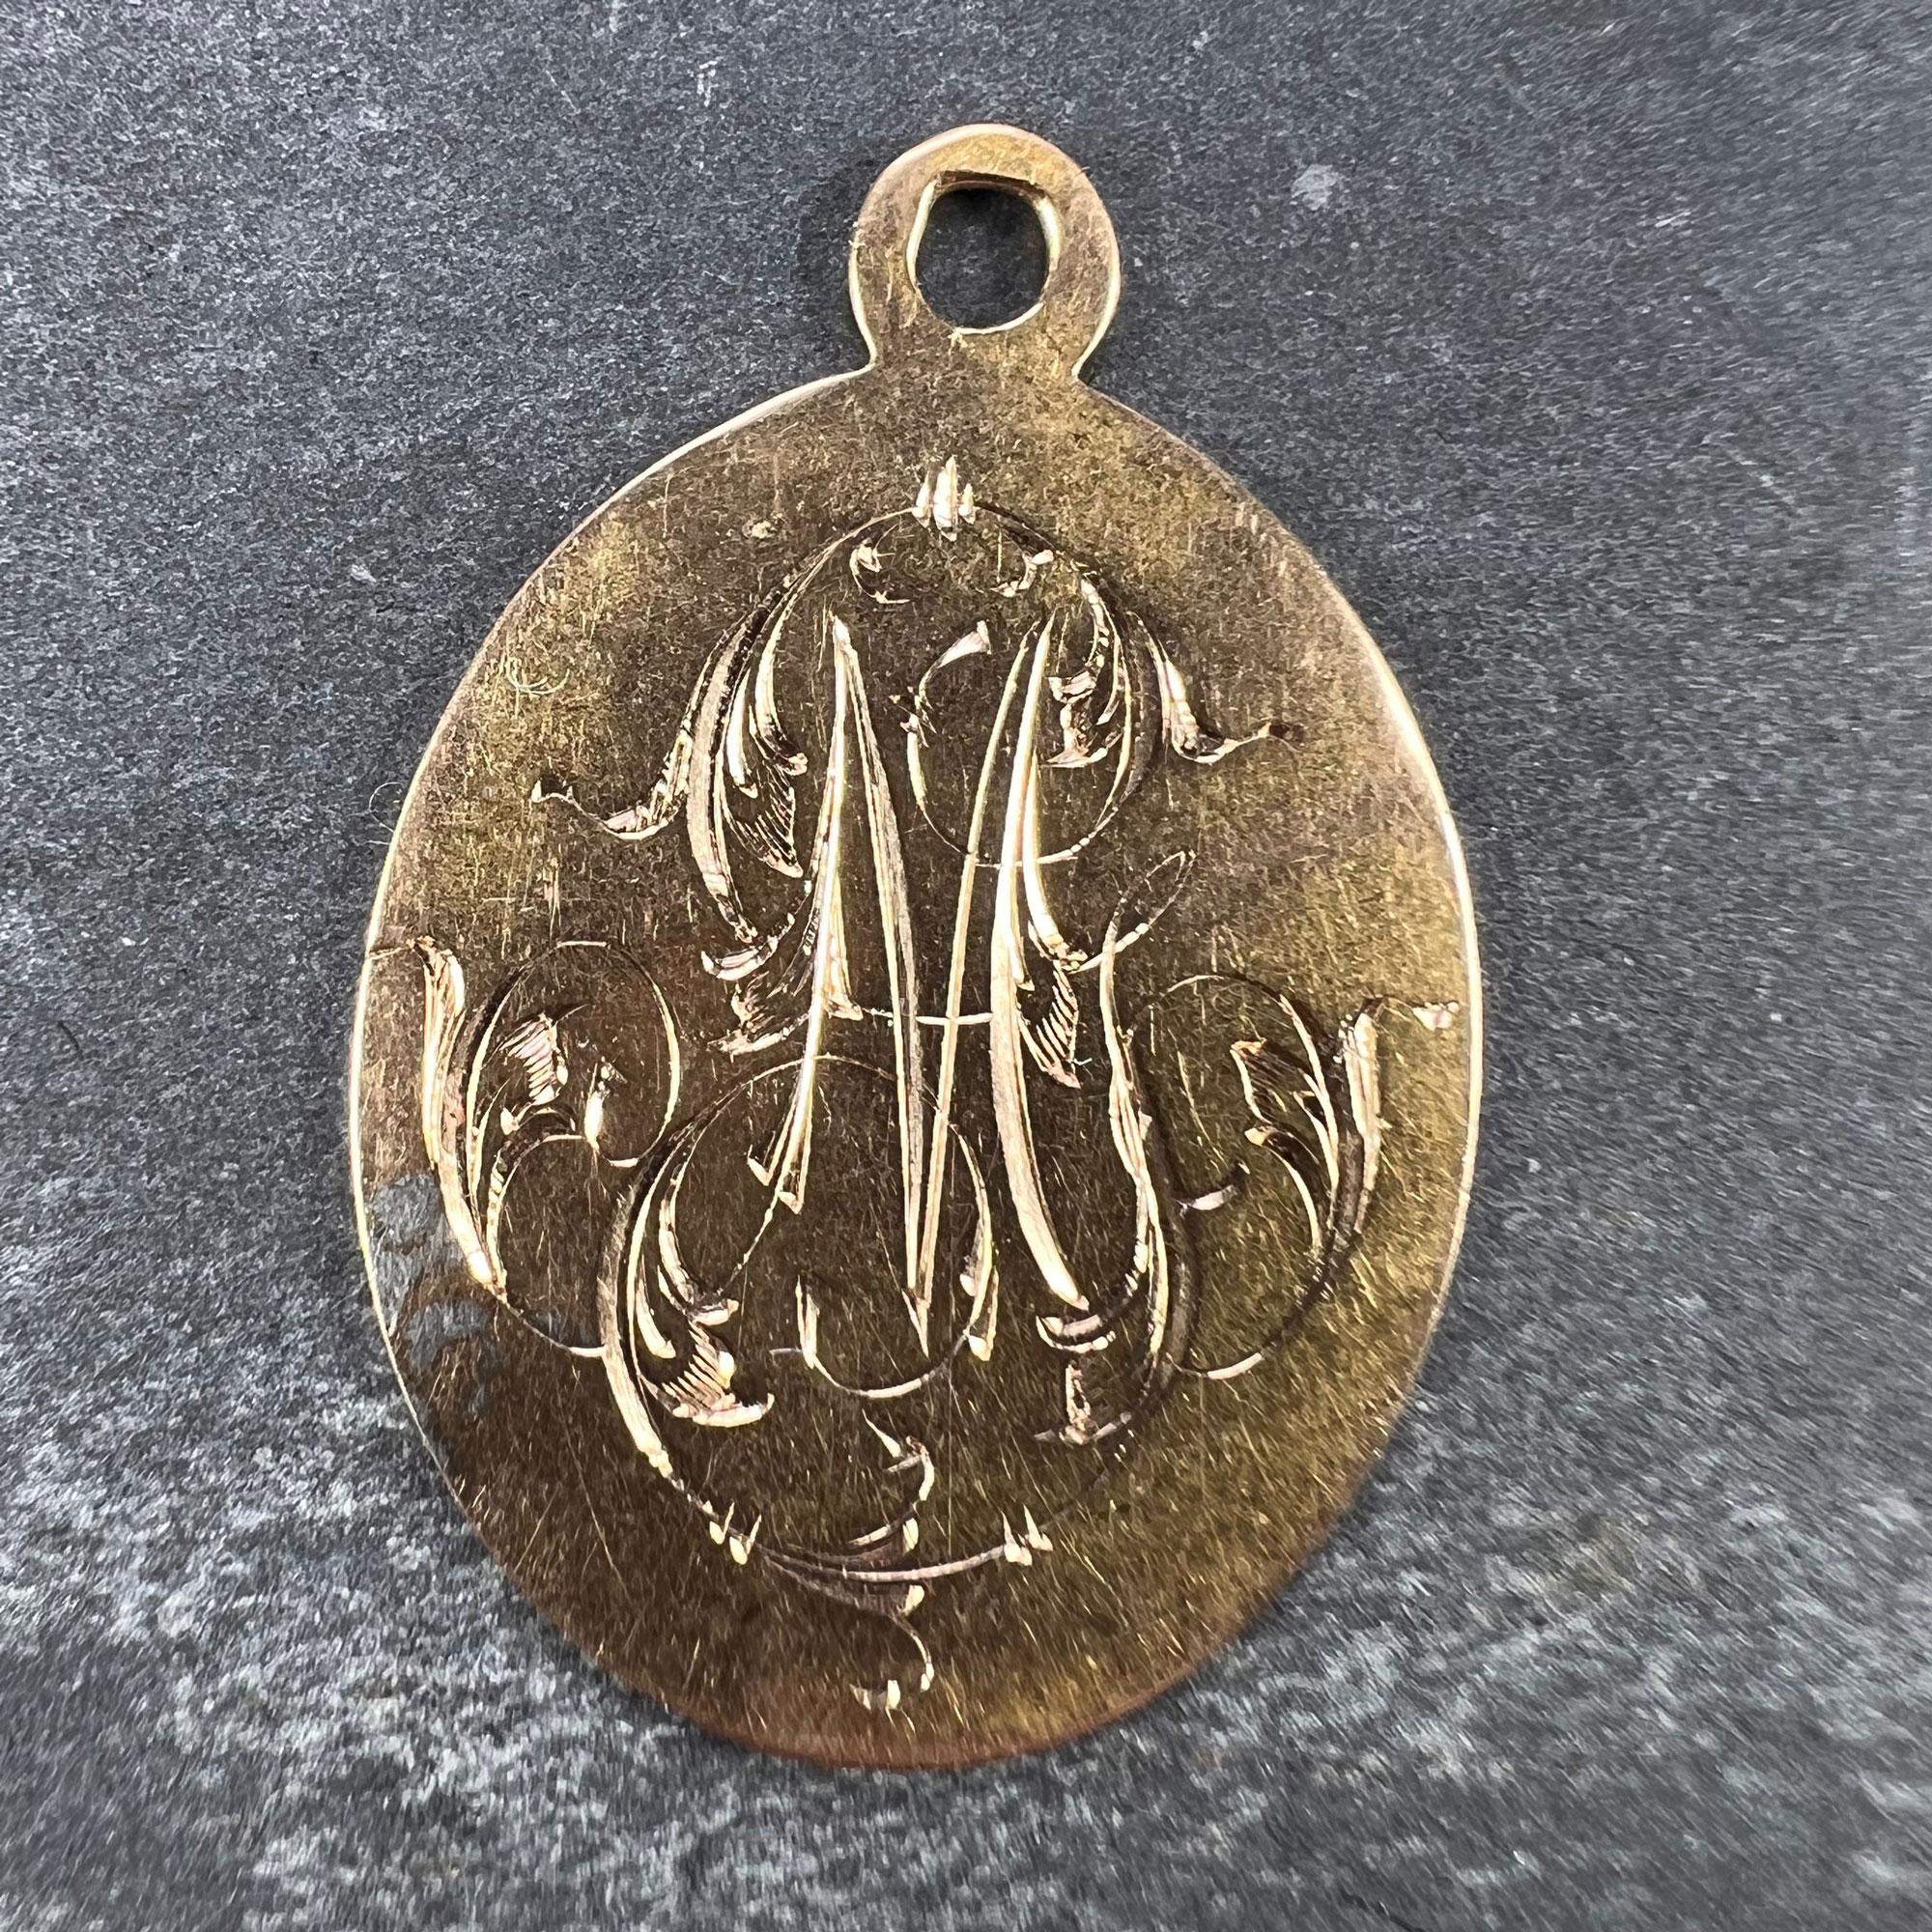 A French 18 karat (18K) yellow gold charm pendant designed as an oval medal detailing the monogram MG or GM in engraved script. Engraved to the reverse with the date '16 Juillet 1905'. Unmarked but tested for 18 karat gold.

Dimensions: 2.8 x 2 x